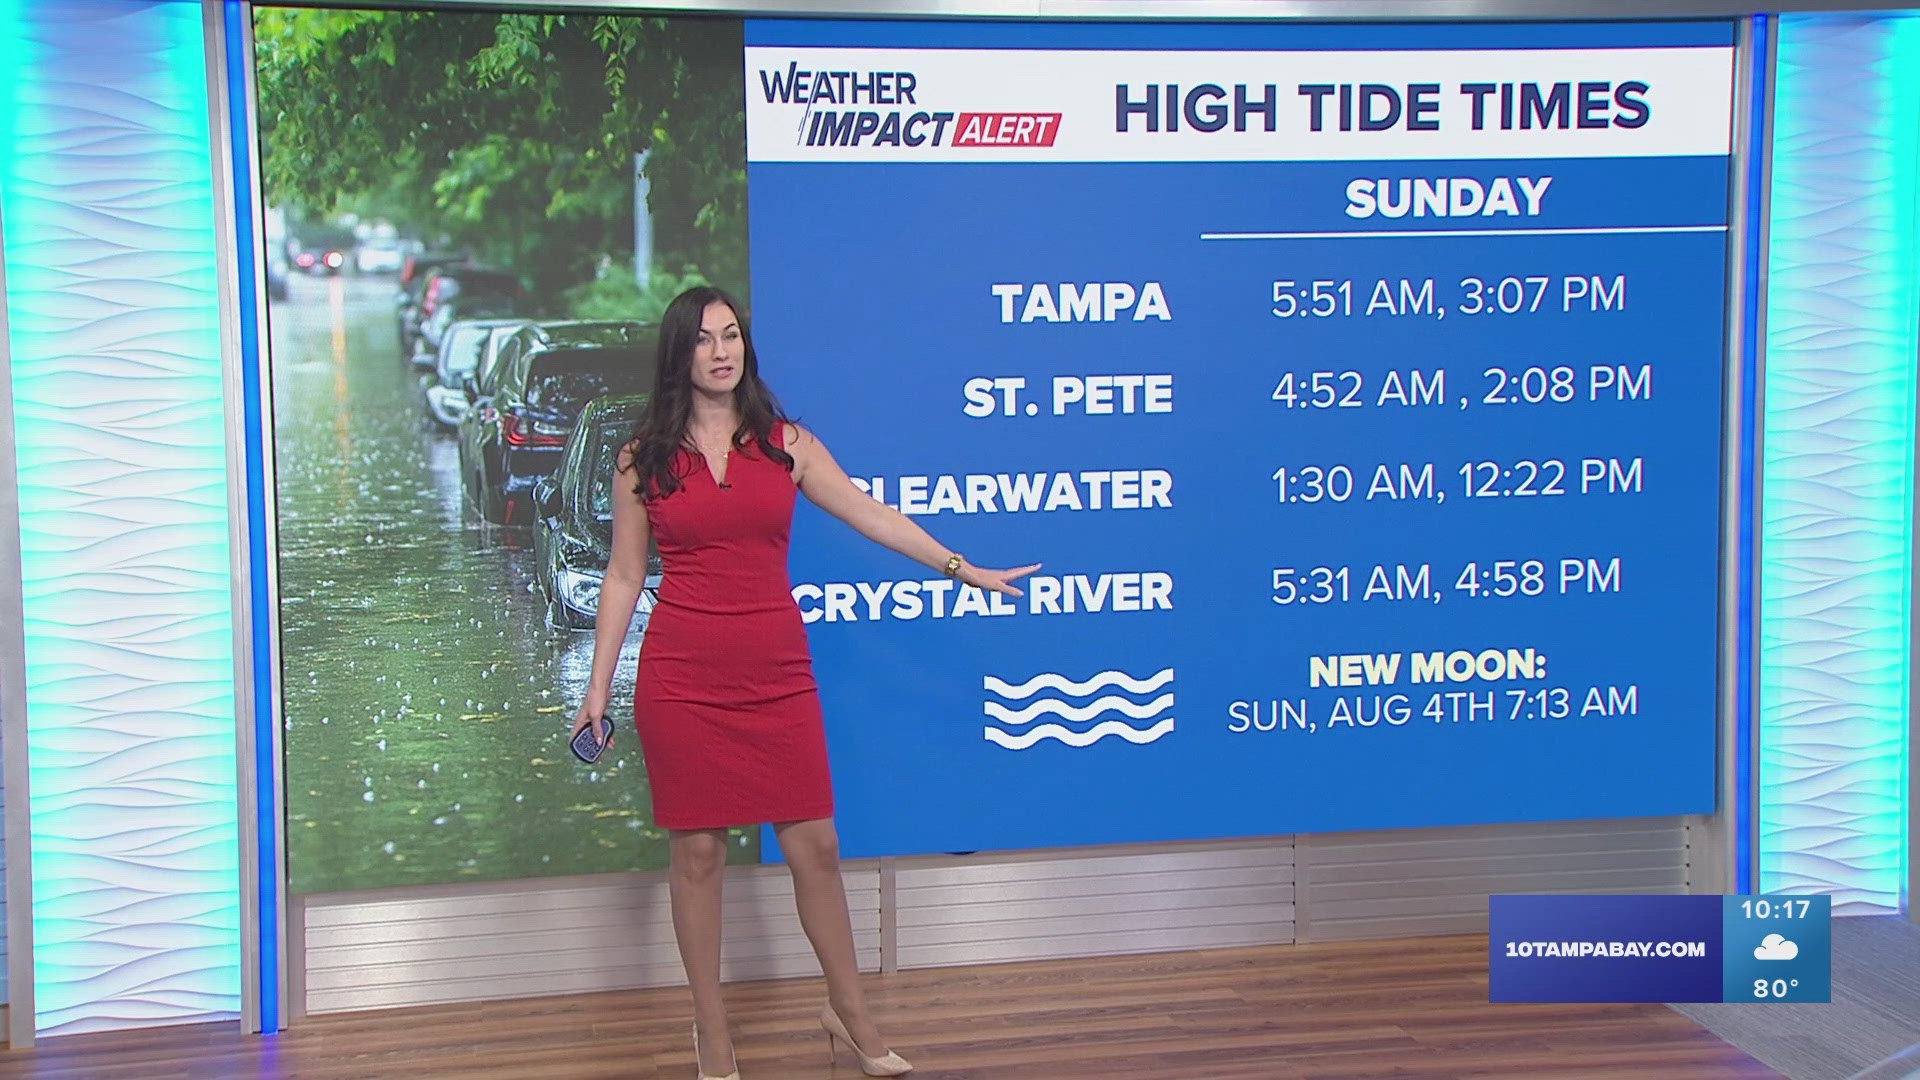 Tide times also play a factor when it comes to the threat of storm surge.